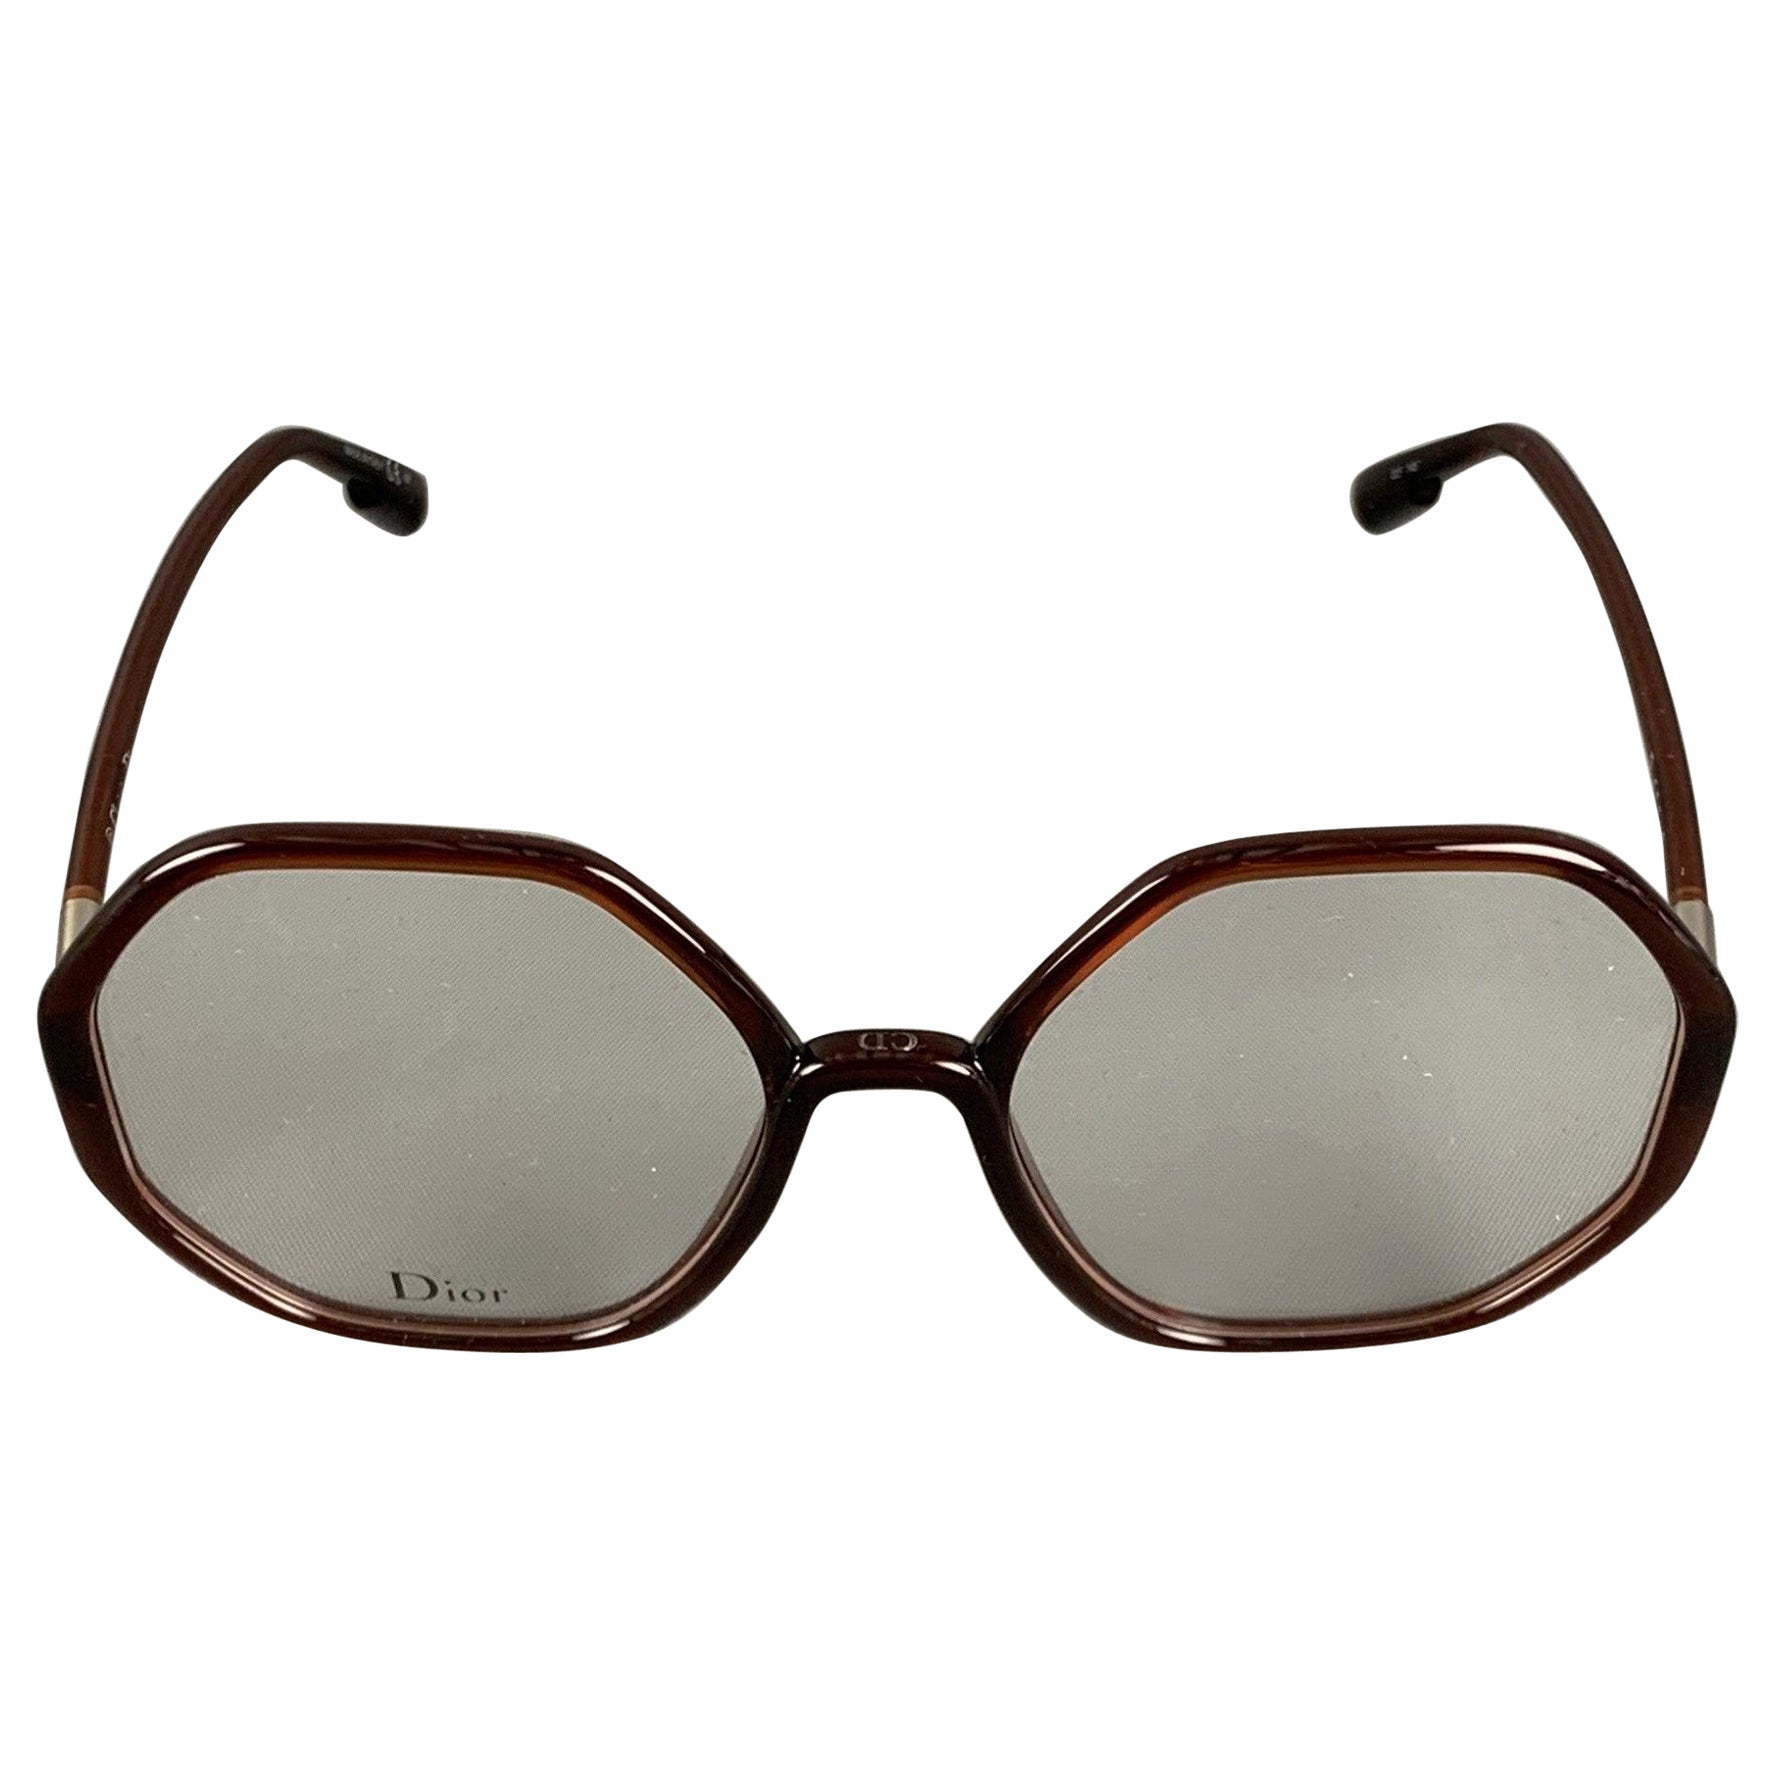 CHRISTIAN DIOR Brown Acetate Frames For Sale